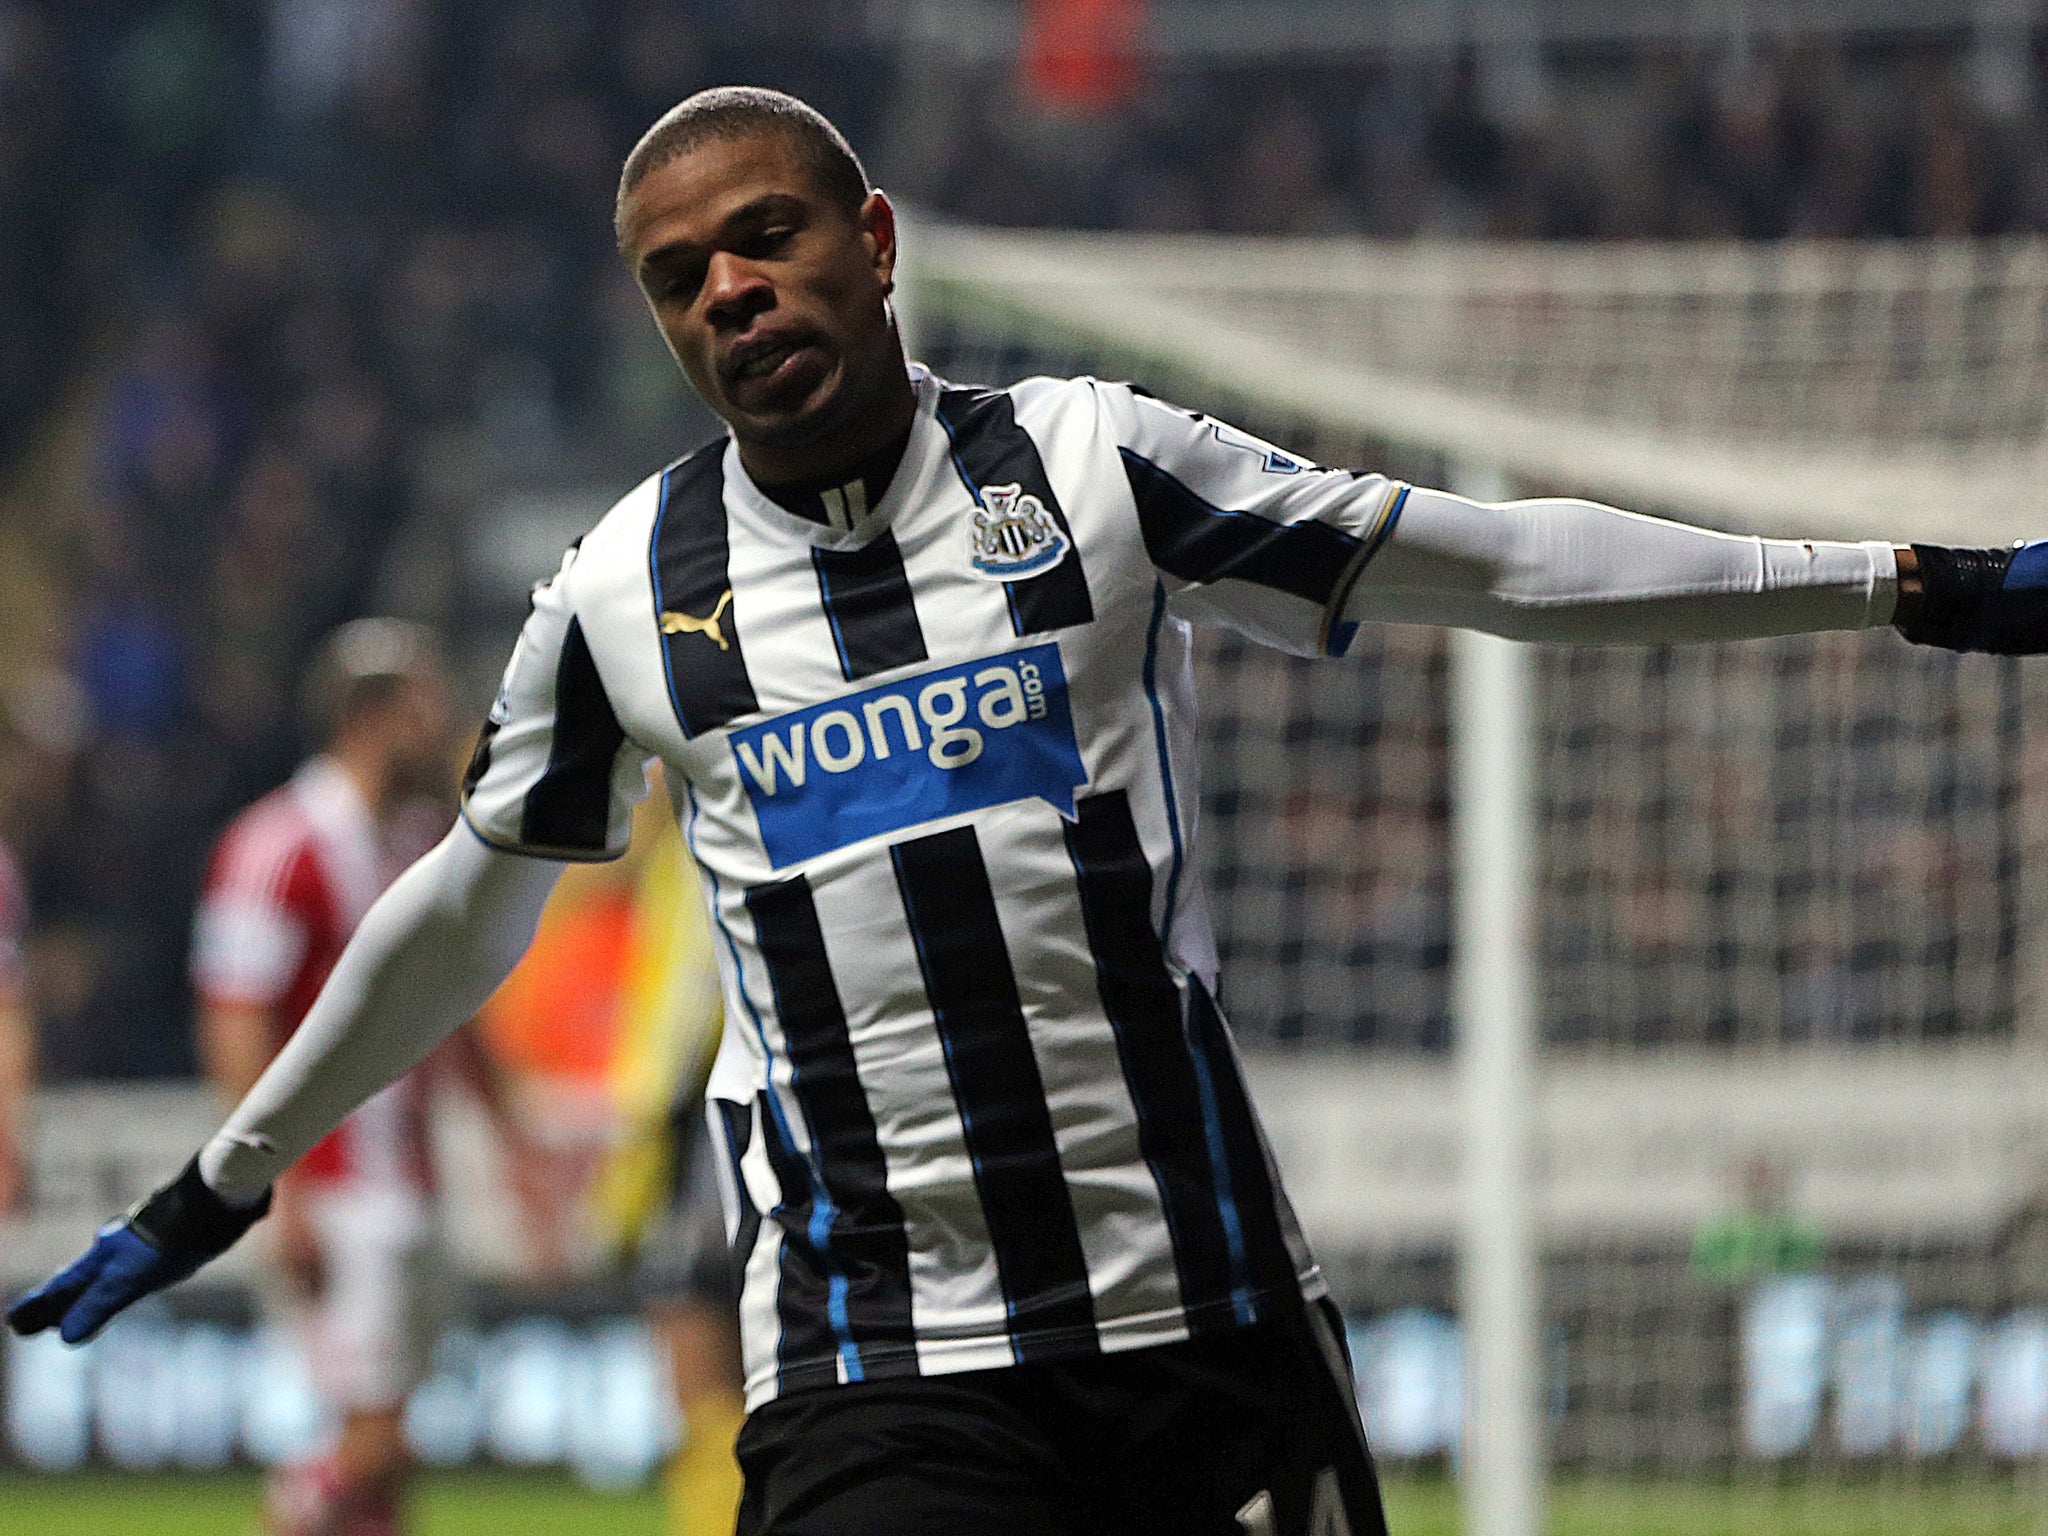 Loic Remy celebrates after scoring for Newcastle against Stoke